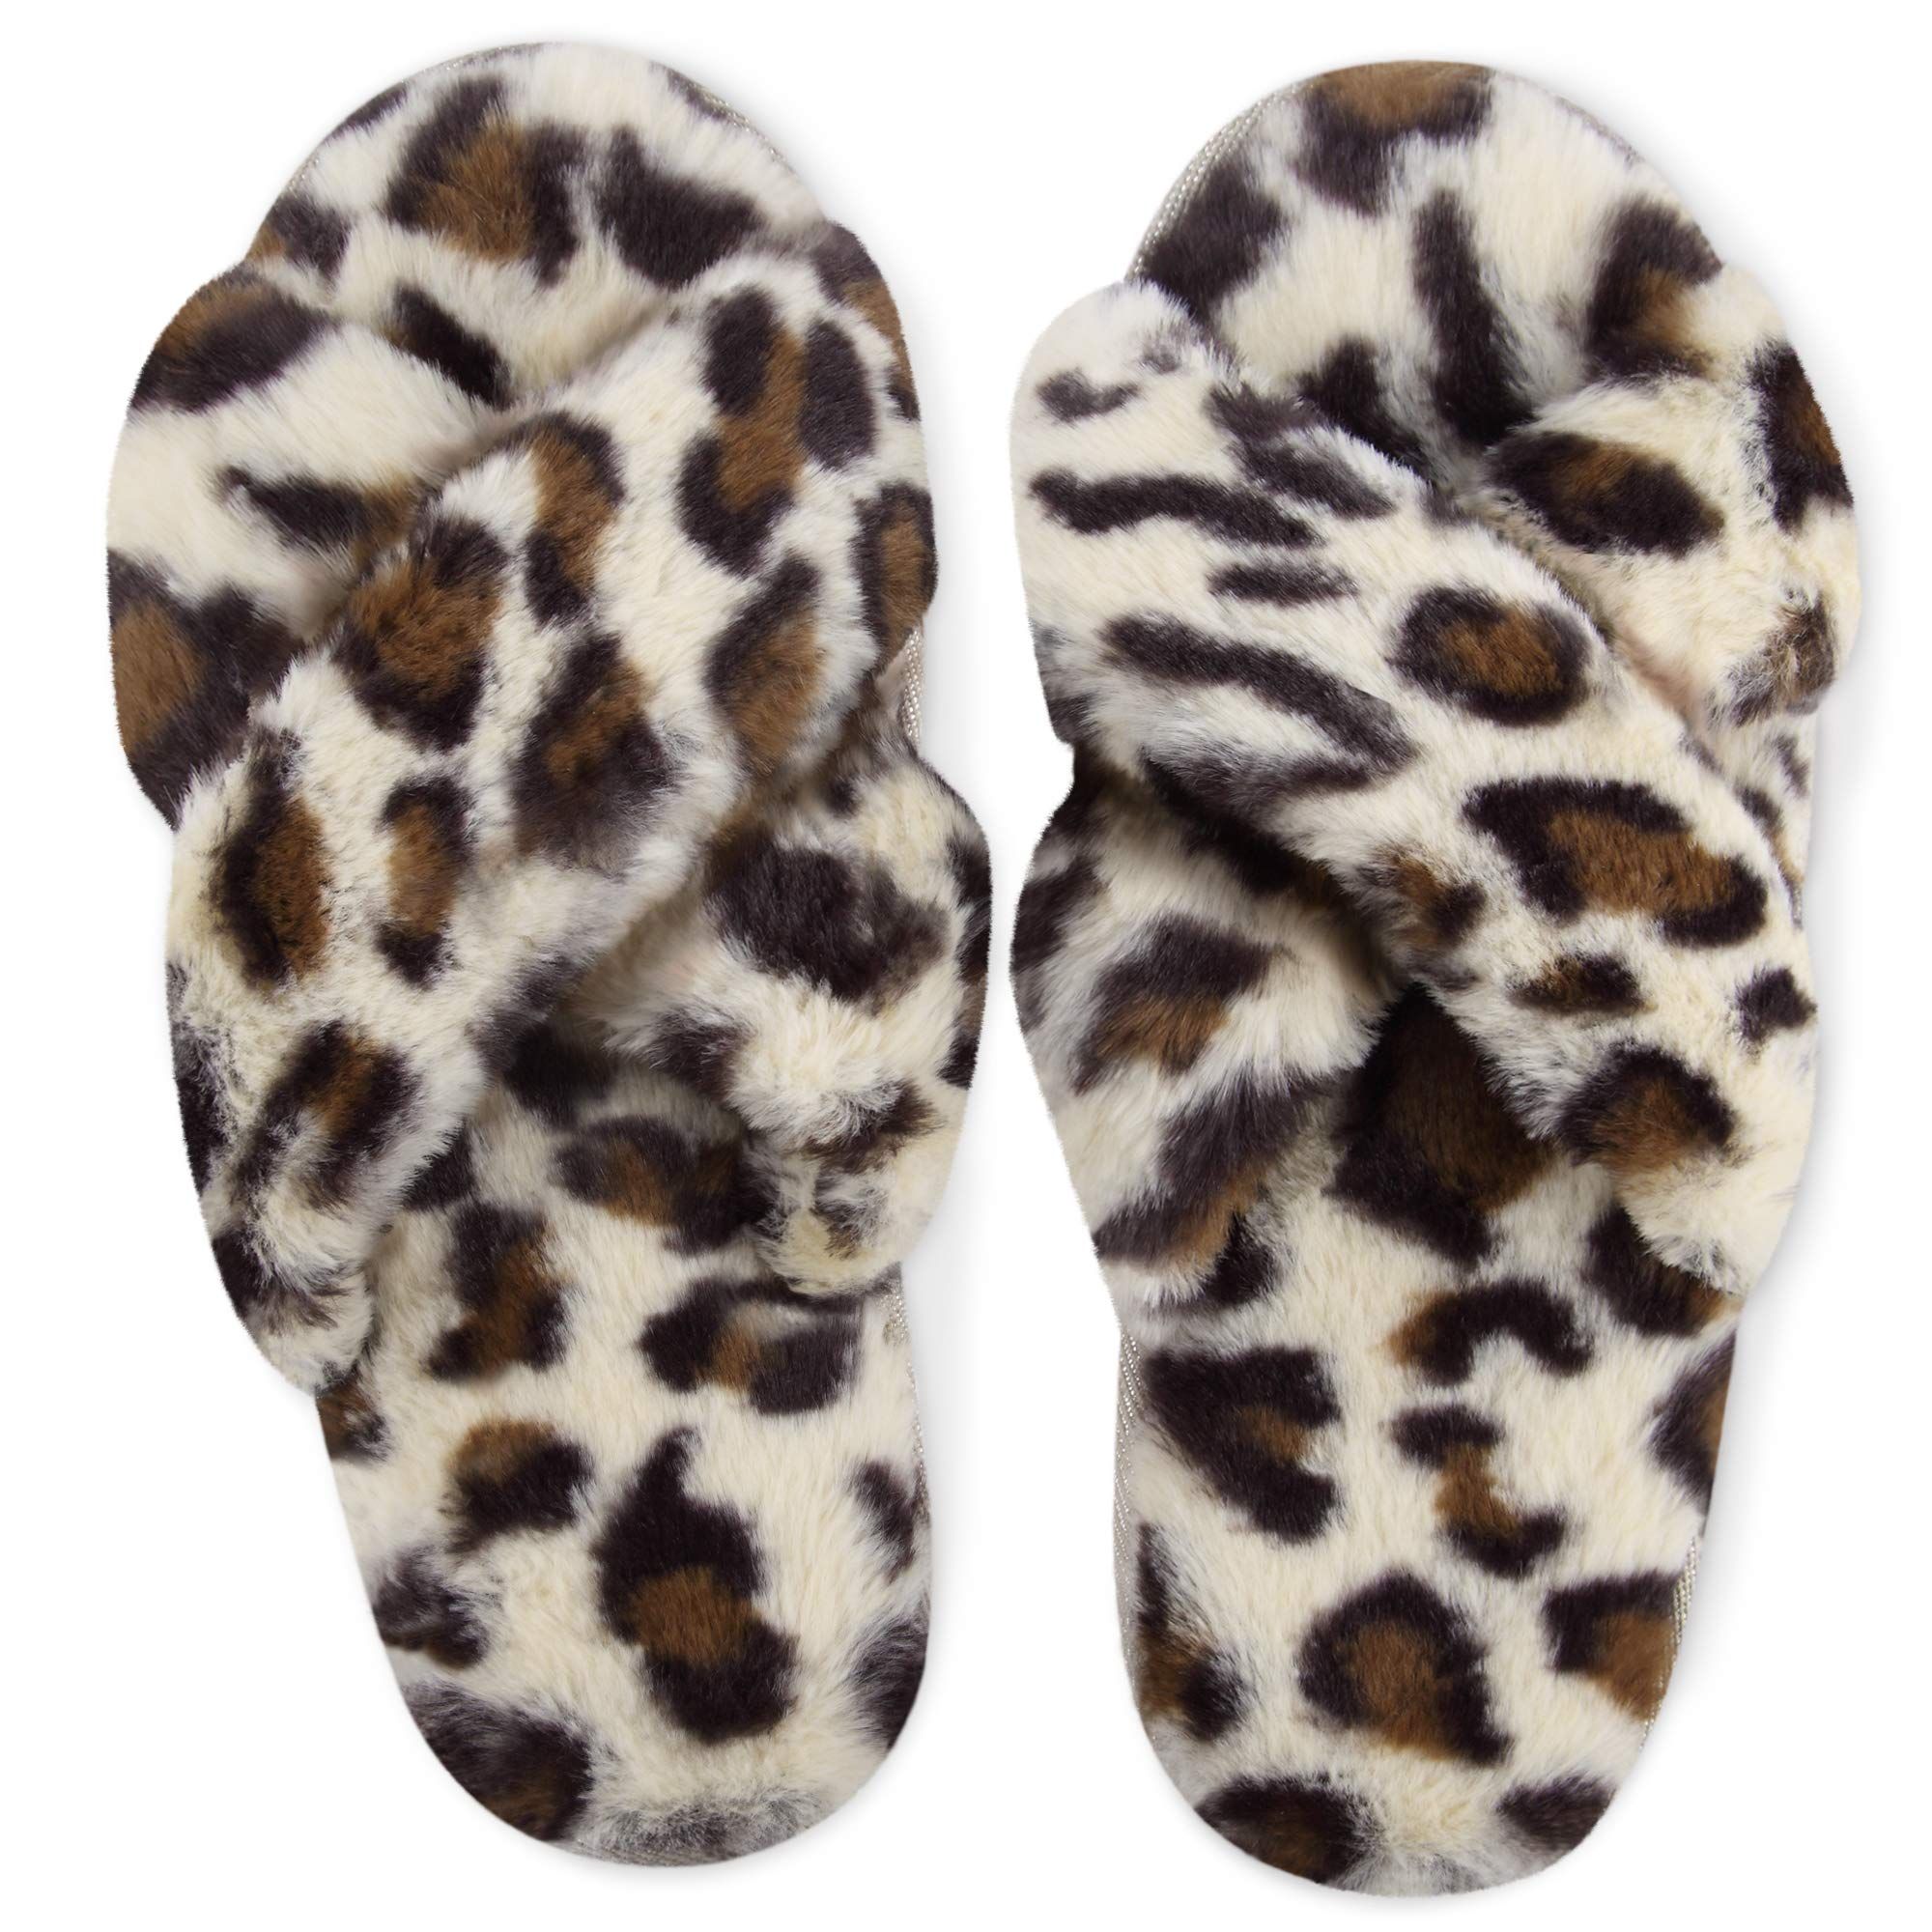 Bergman Kelly Open Toe Slippers for Women (Clouds Collection), US Company | Walmart (US)